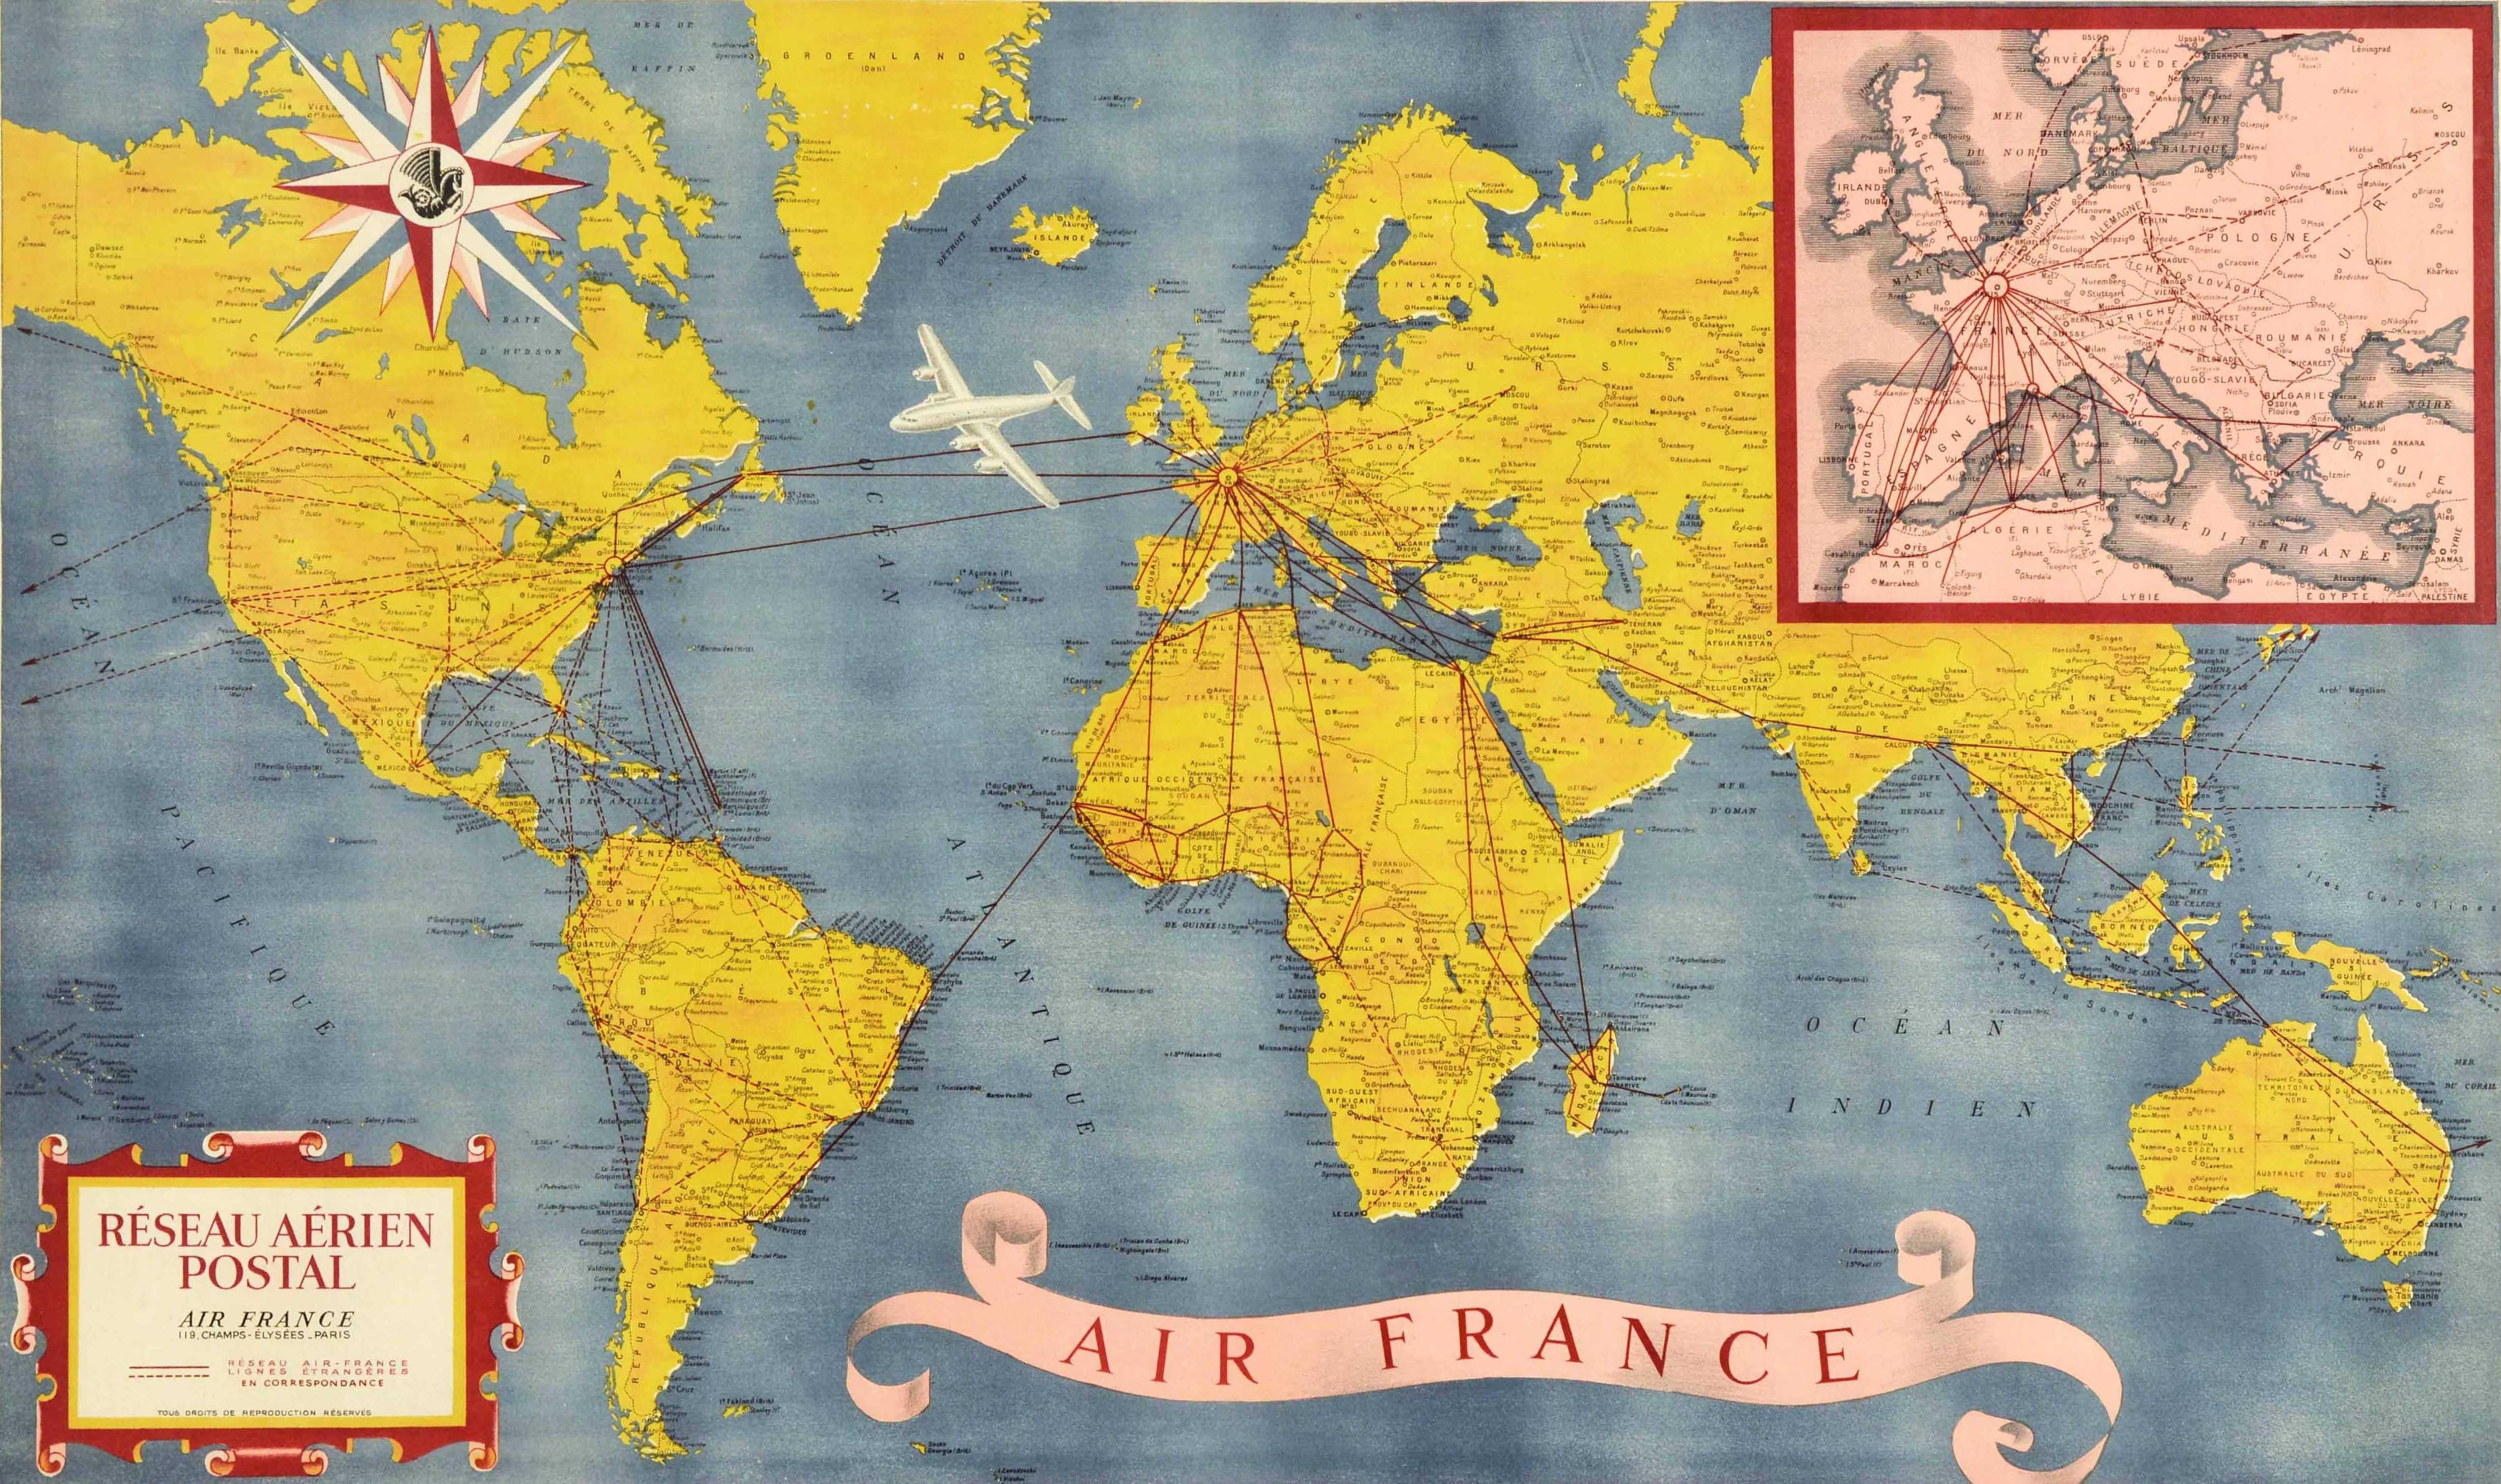 Original vintage Air France map poster - Air France Reseau Aerian Postal / Air France Postal Network - featuring a colourful planisphere design showing the airline routes around the world marking the continents, countries, cities and oceans with a